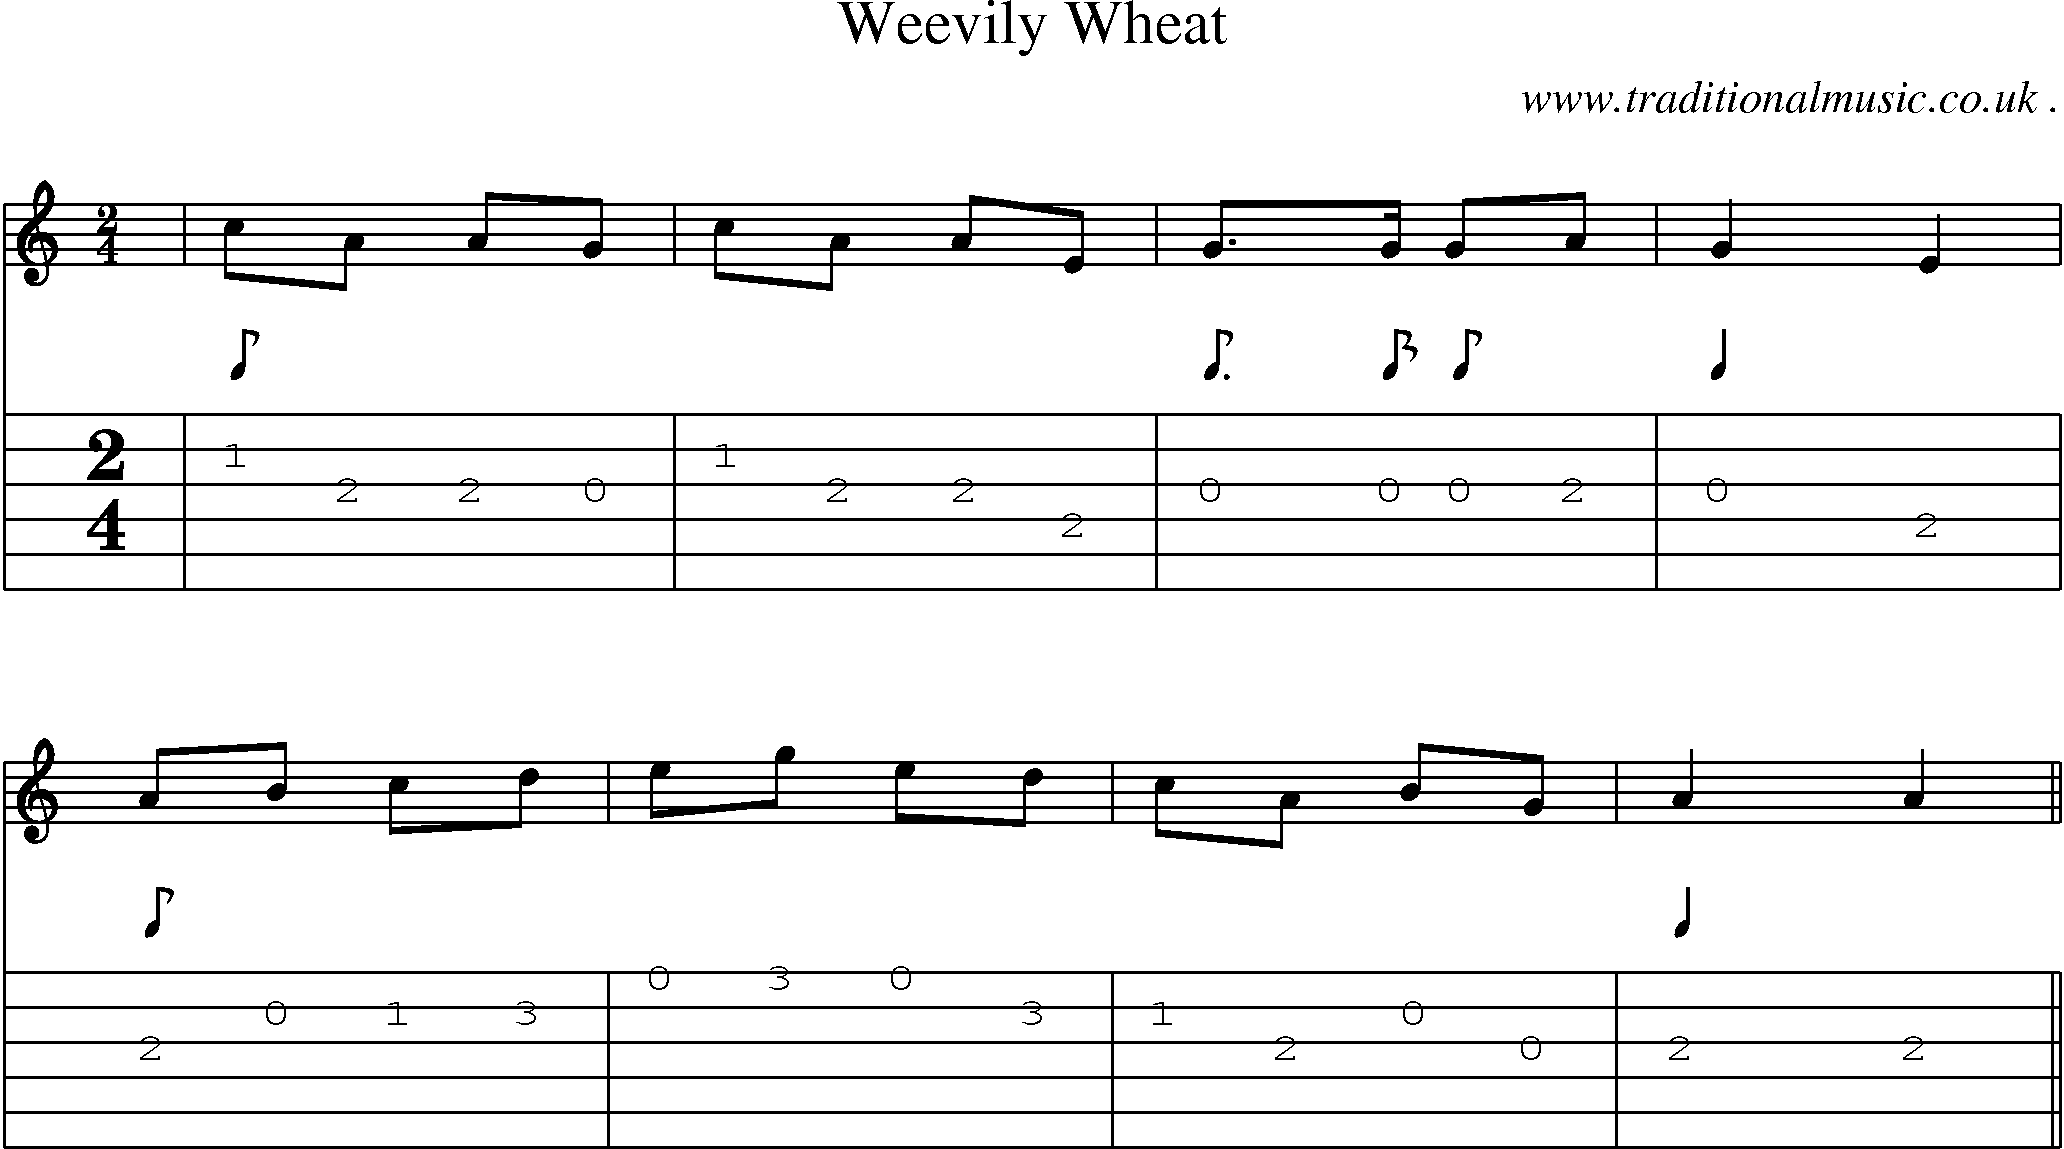 Sheet-Music and Guitar Tabs for Weevily Wheat